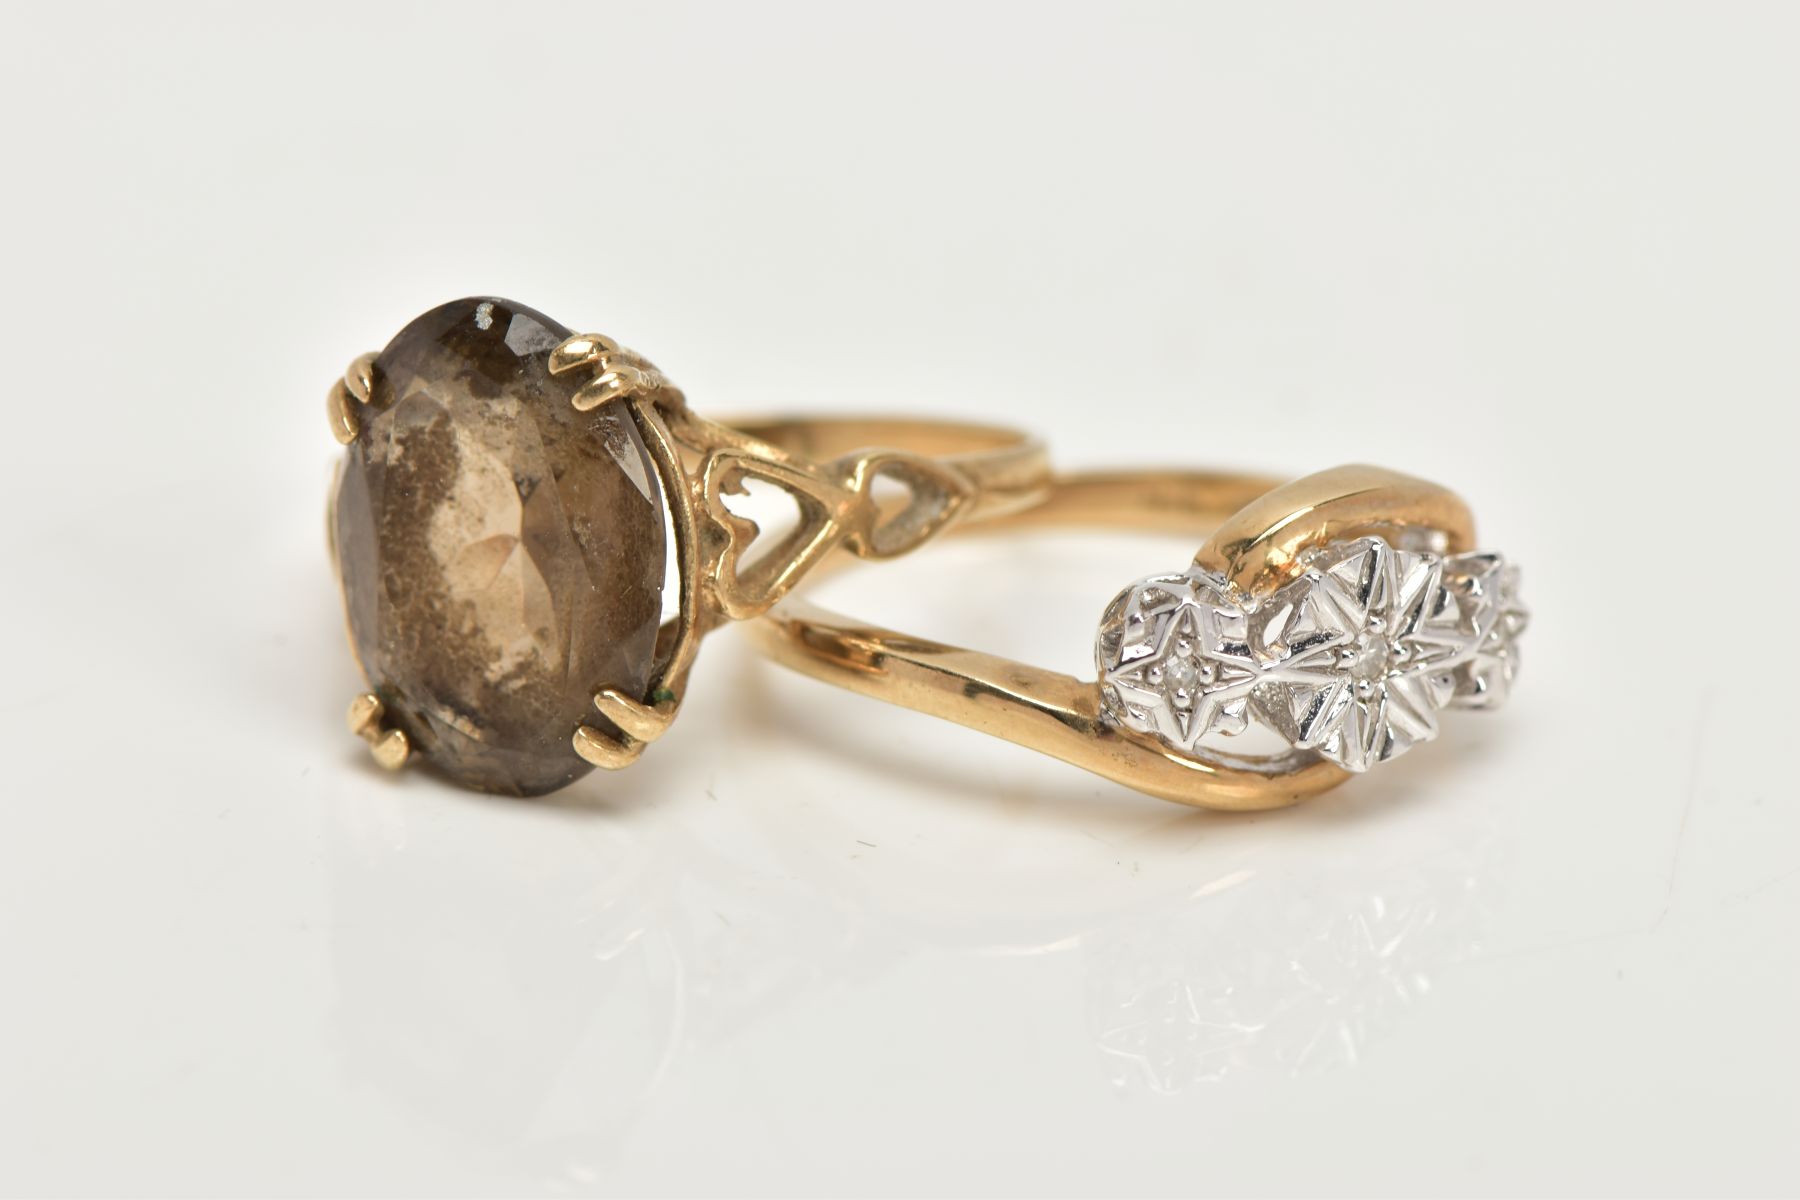 TWO 9CT GOLD RINGS, an oval cut stone assessed as Smokey quartz, prong set in a yellow gold, leading - Image 3 of 4